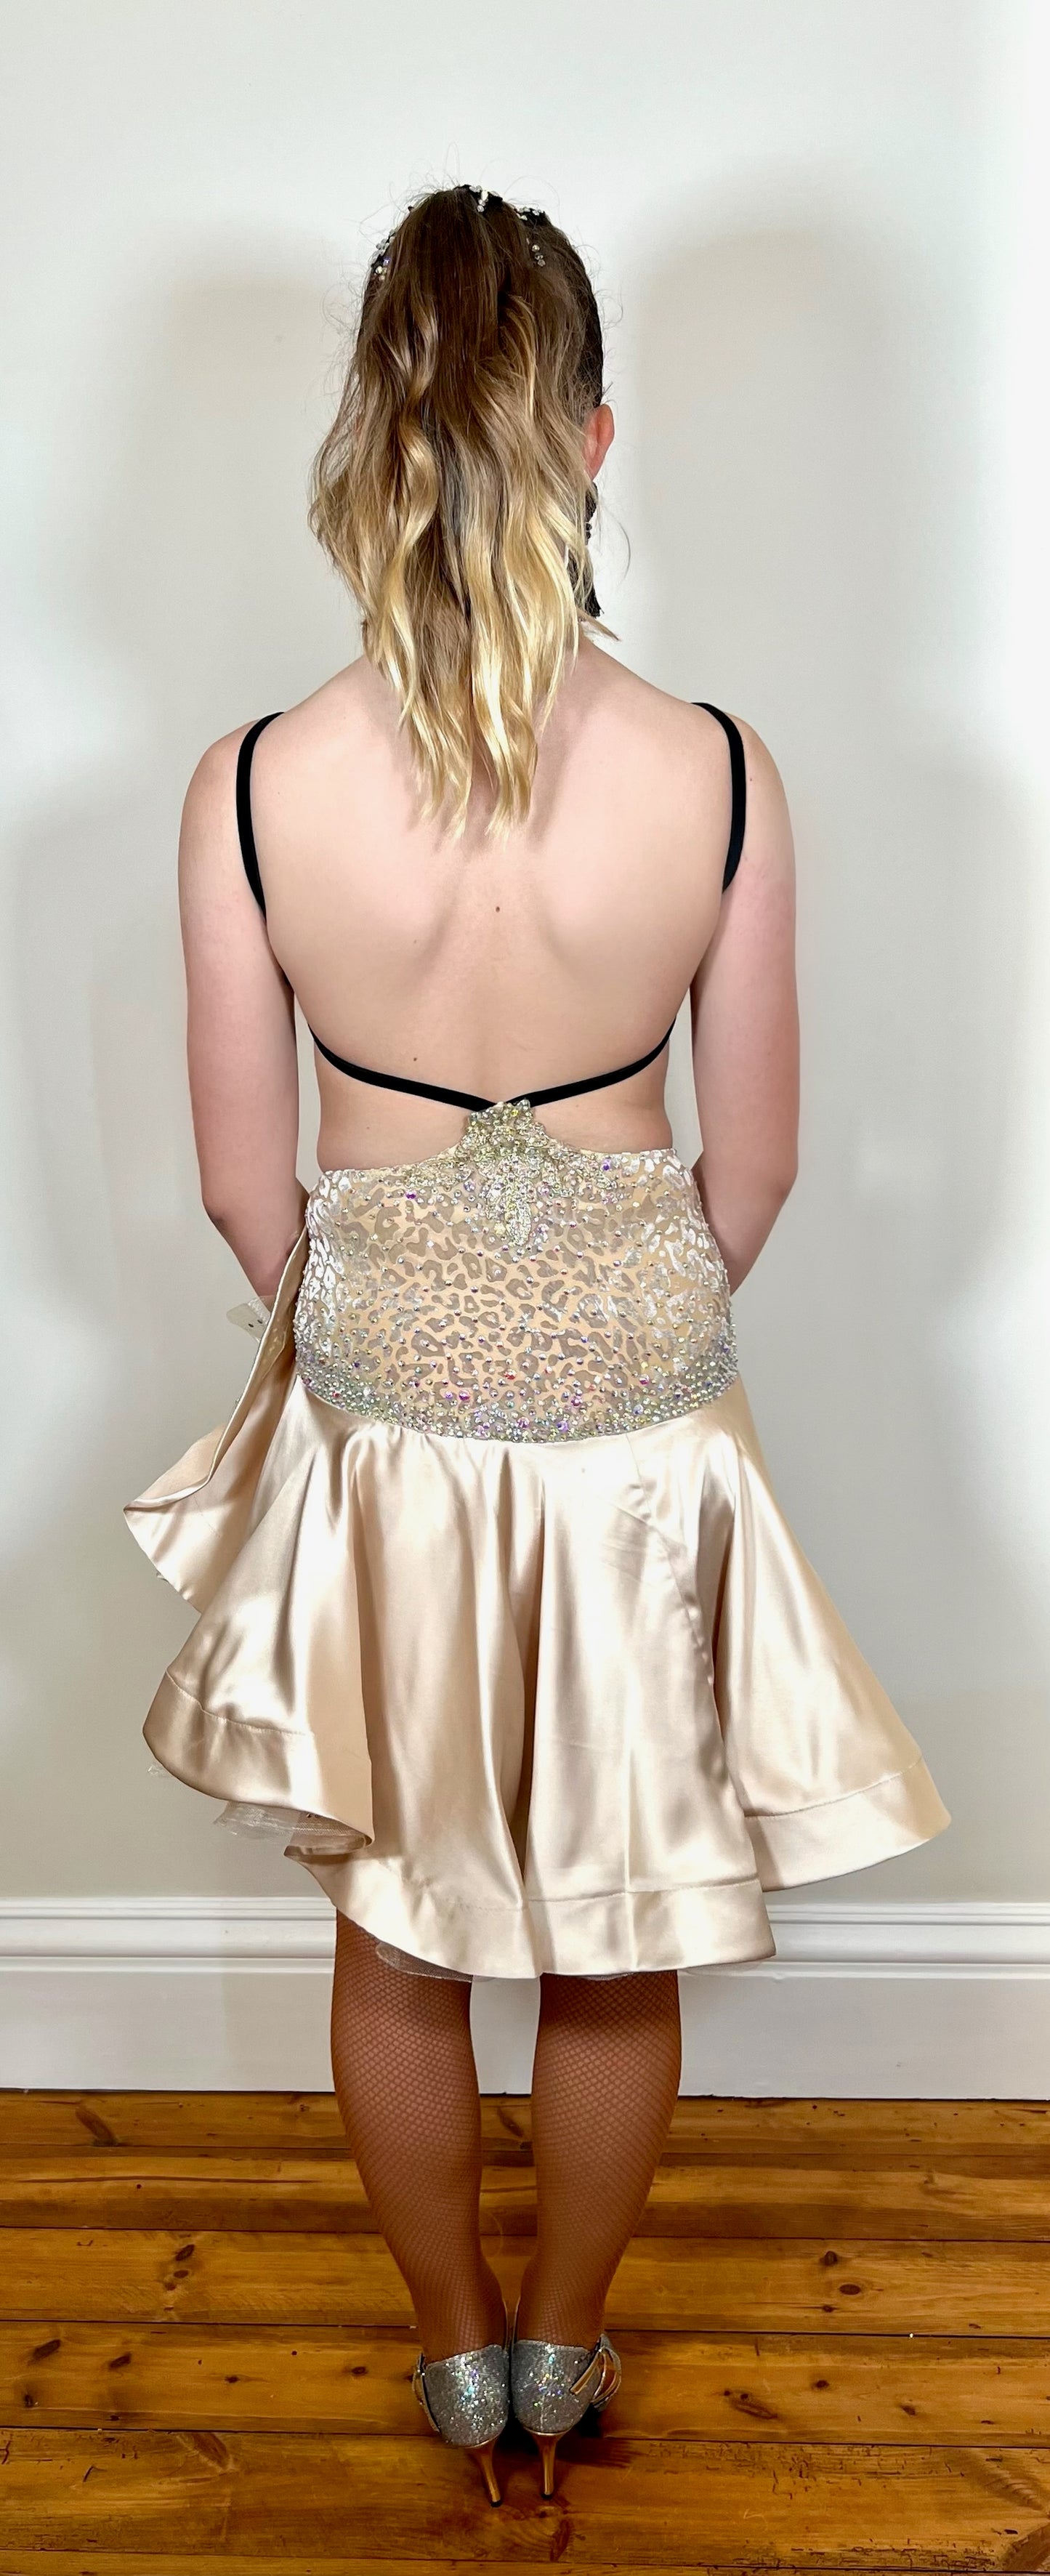 175 Champagne flick Leopard fabric Latin dress. Soft satin skirt with motif detailing to one hip. Gold appliqué with AB stones